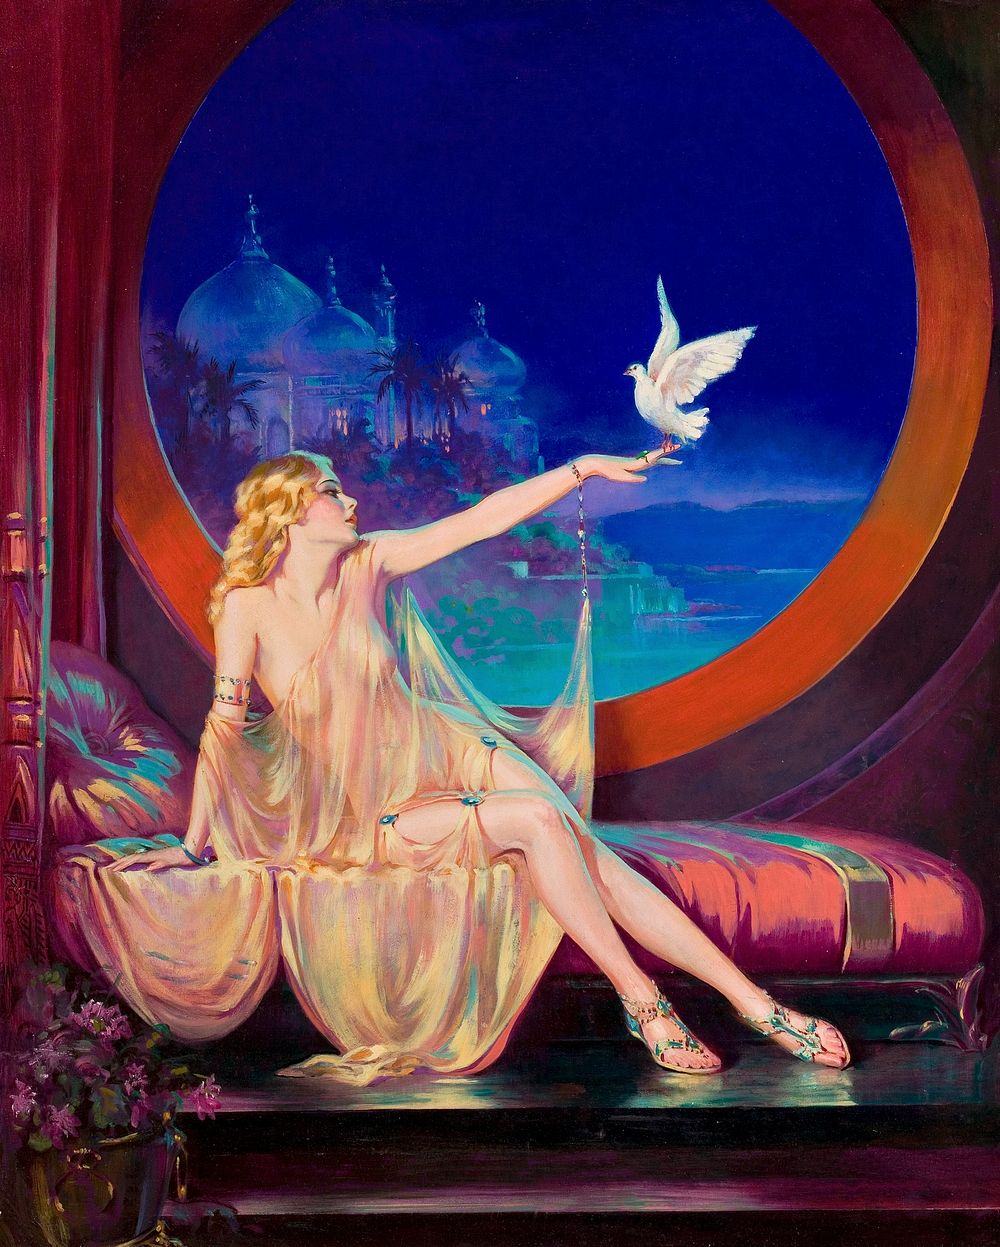 Henry Clive's Sultana (1925) aesthetic oil painting. Original public domain image from Wikimedia Commons. Digitally enhanced…